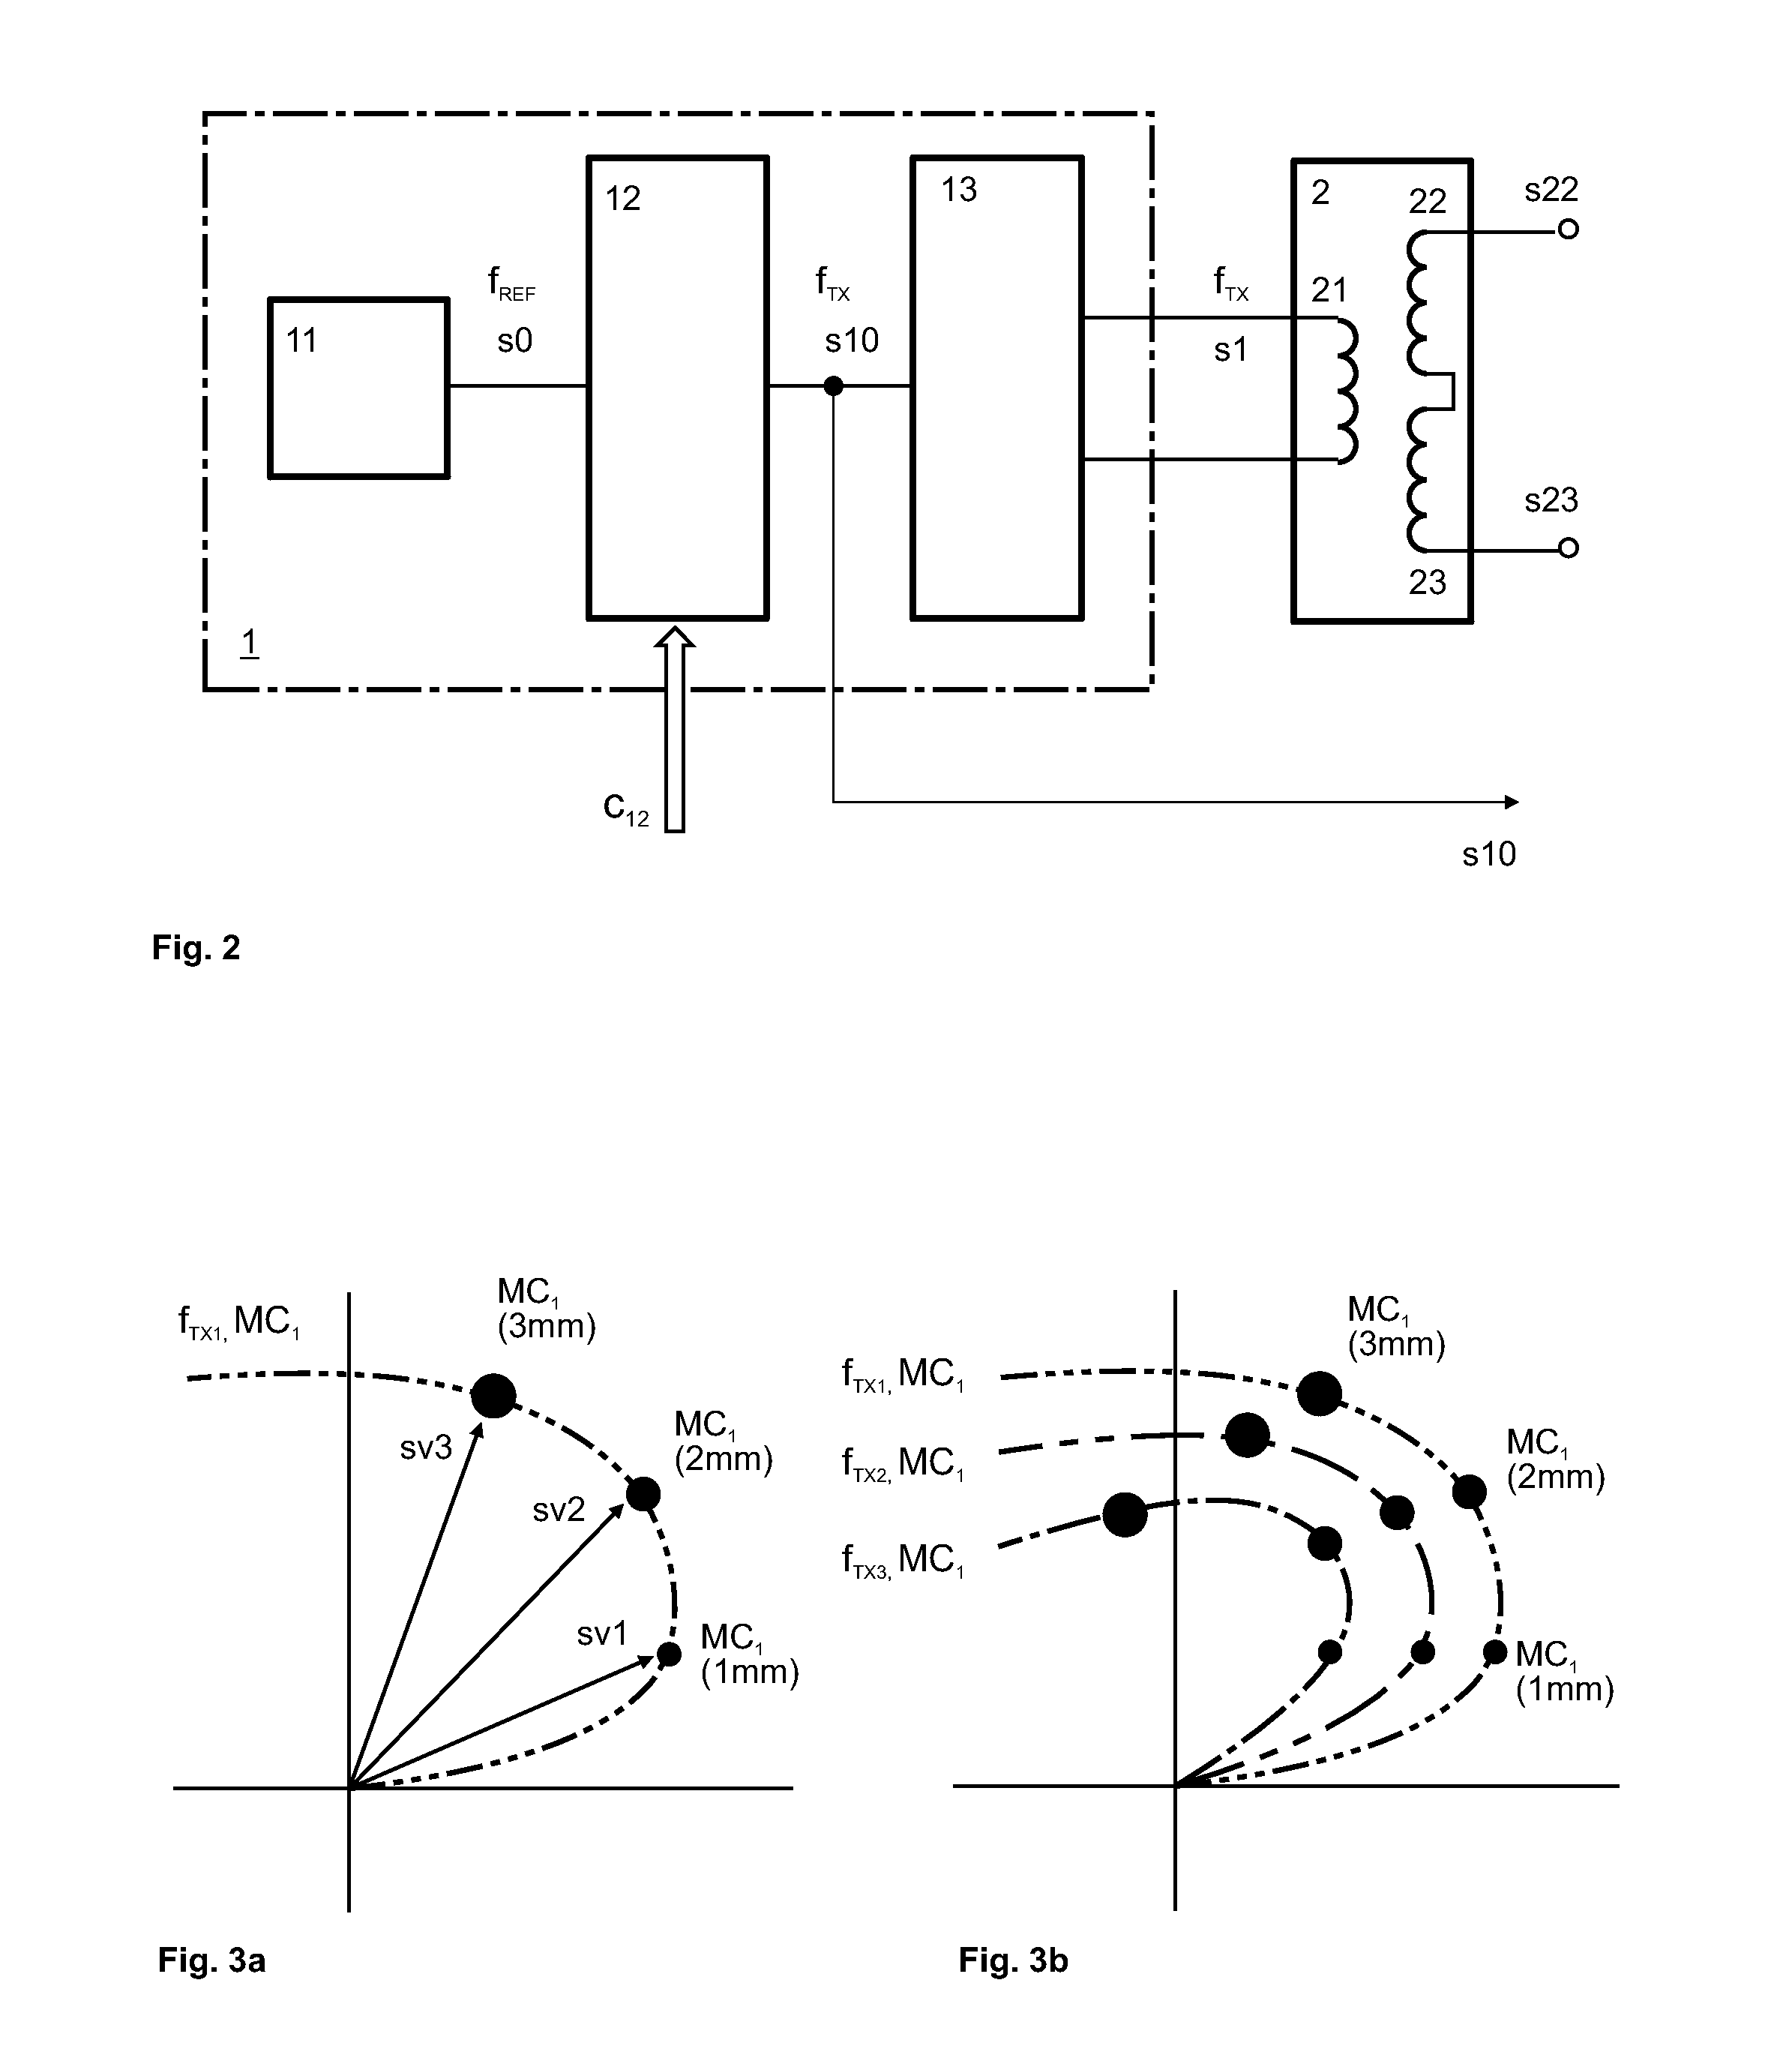 Method for operating a metal detection system and metal detection system